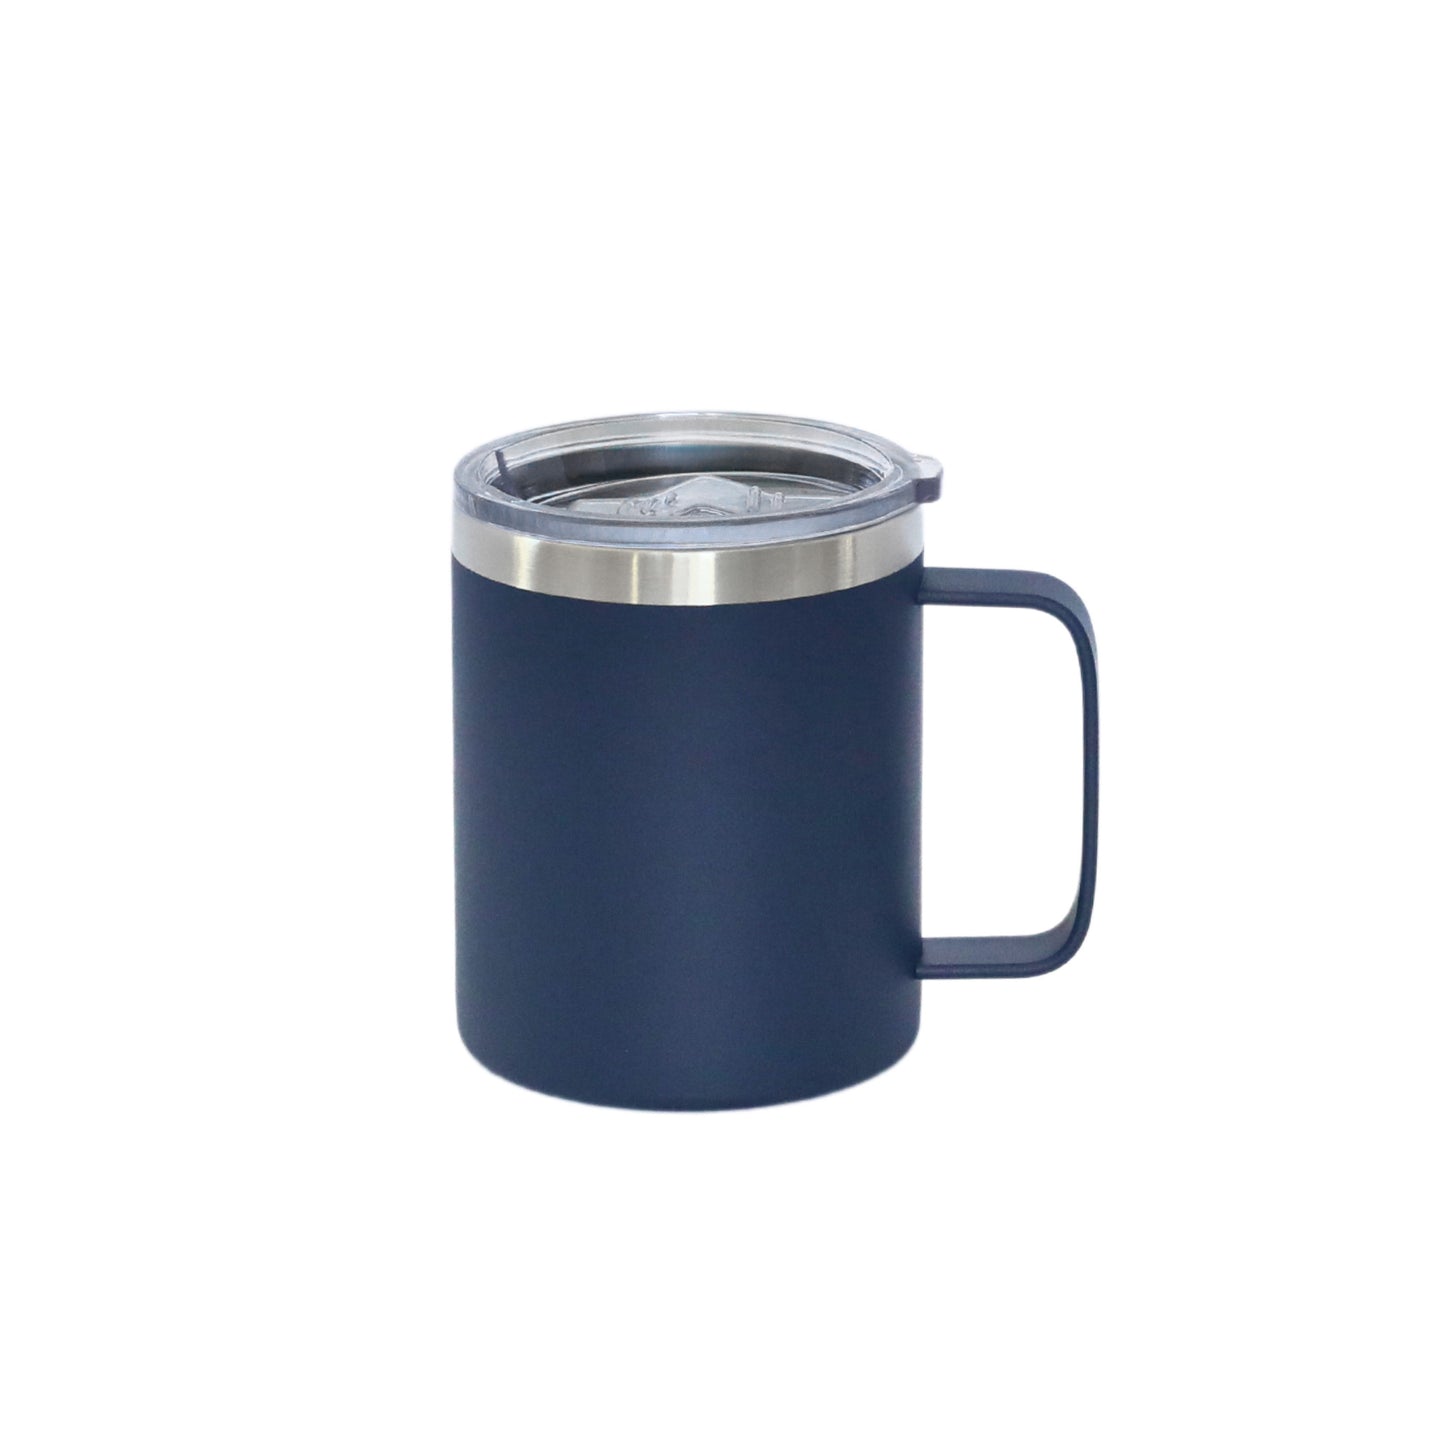 12 Oz Stainless Steel Travel Mug with Handle - Navy